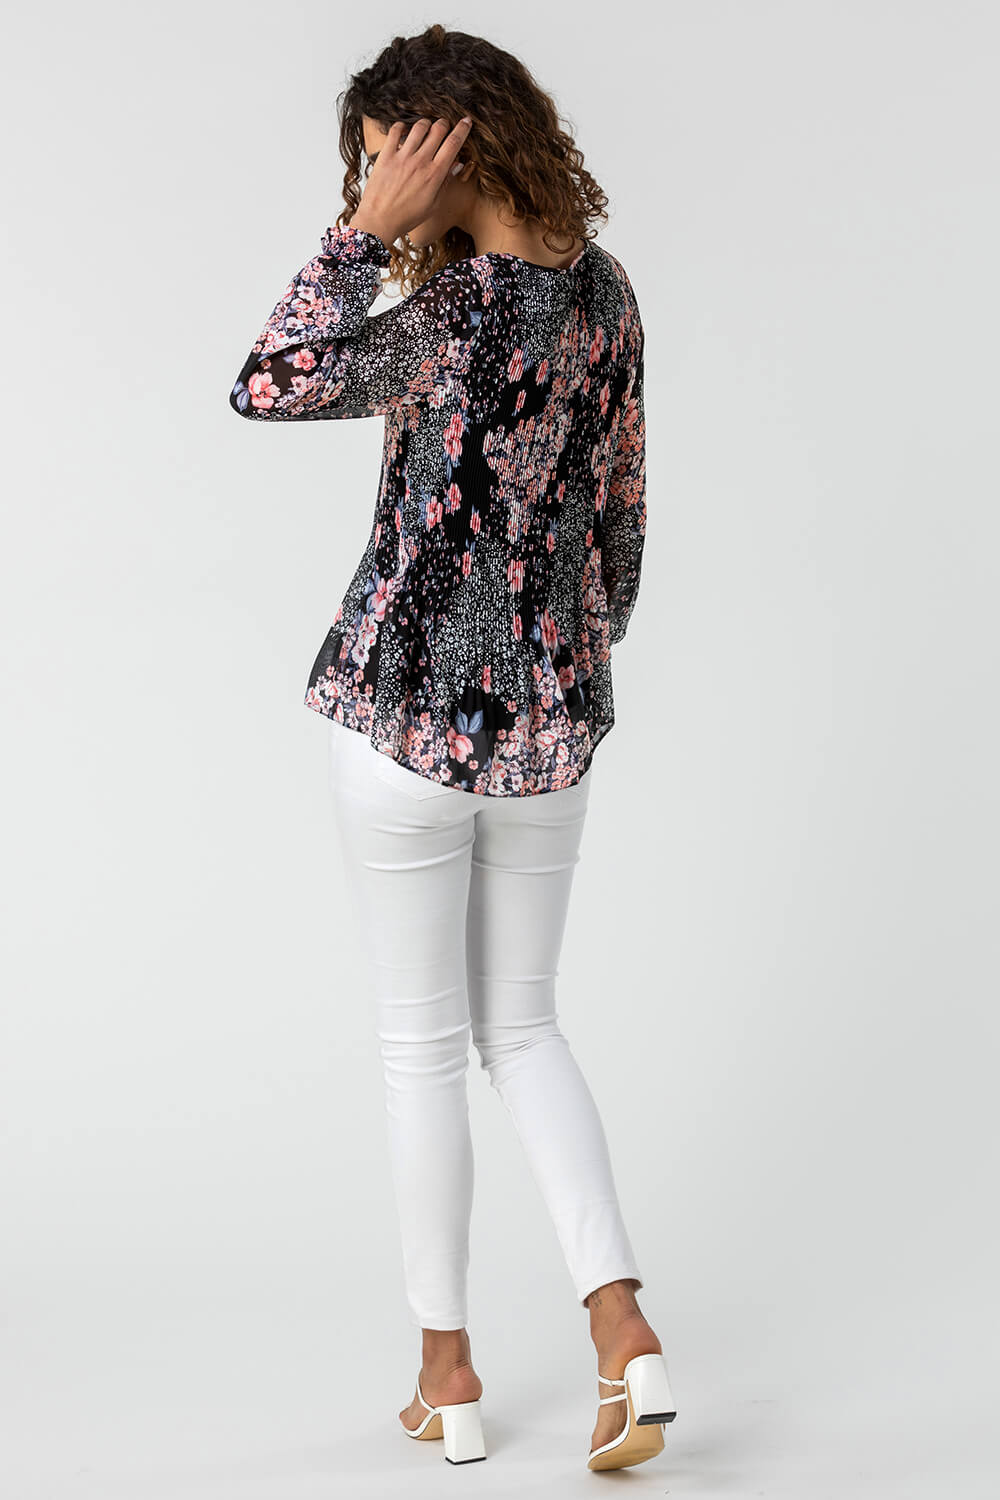 PINK Floral Print Pleated Top, Image 2 of 4